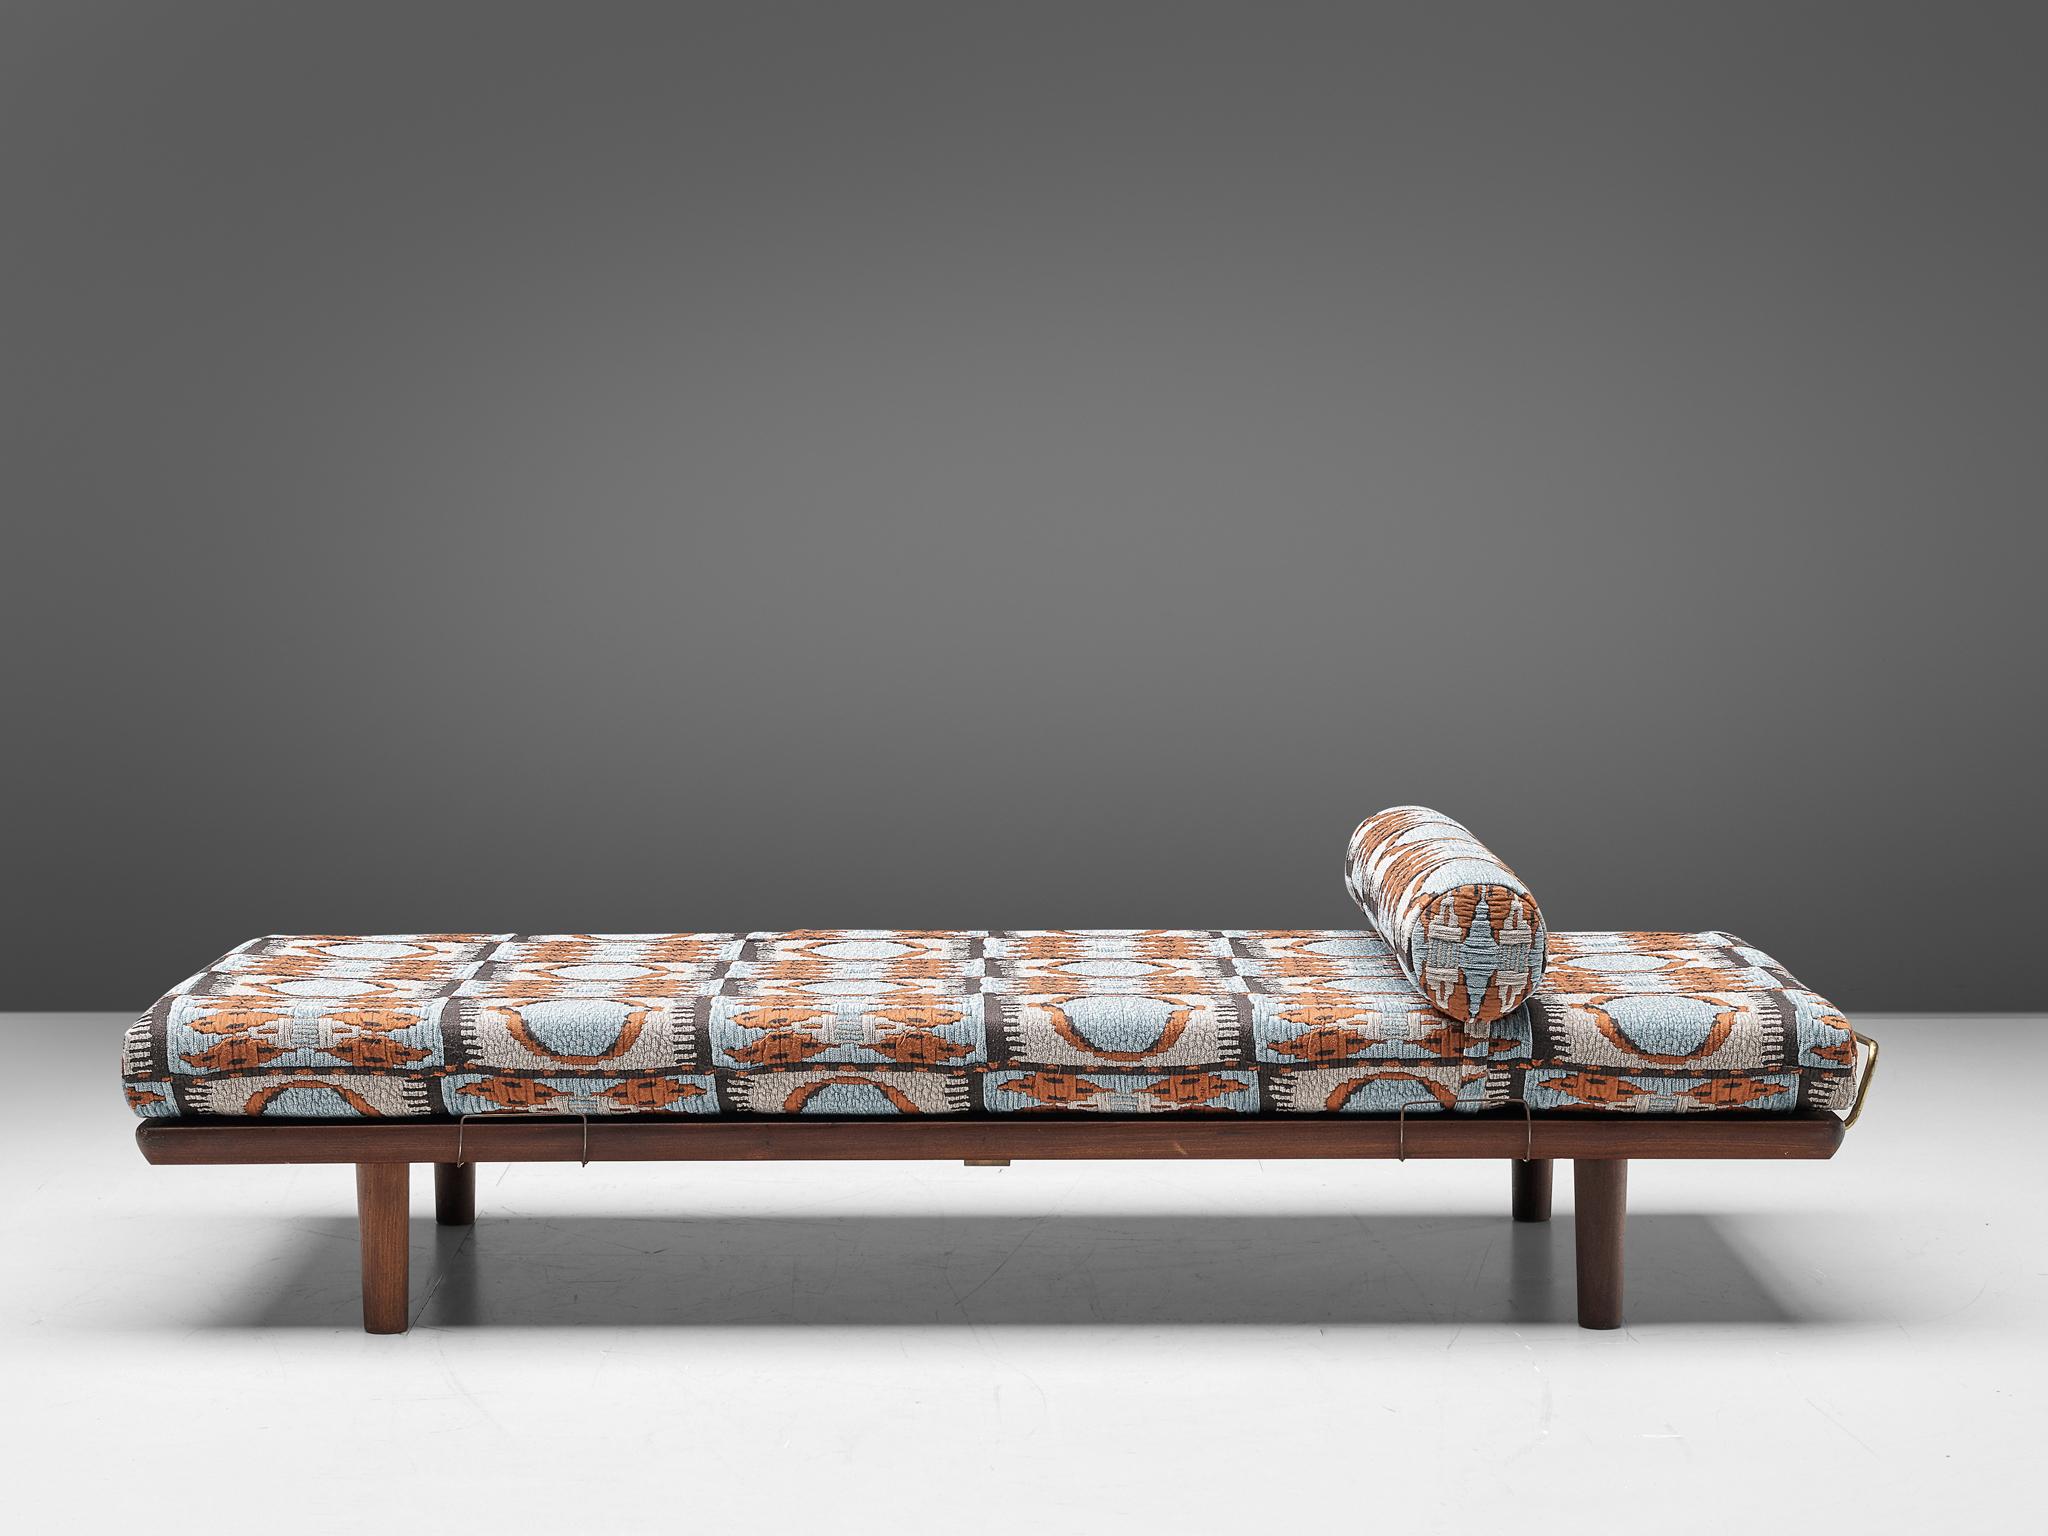 Danish Reupholstered Hans Wegner Daybed wit Ottoman in Pierre Frey for GETAMA 